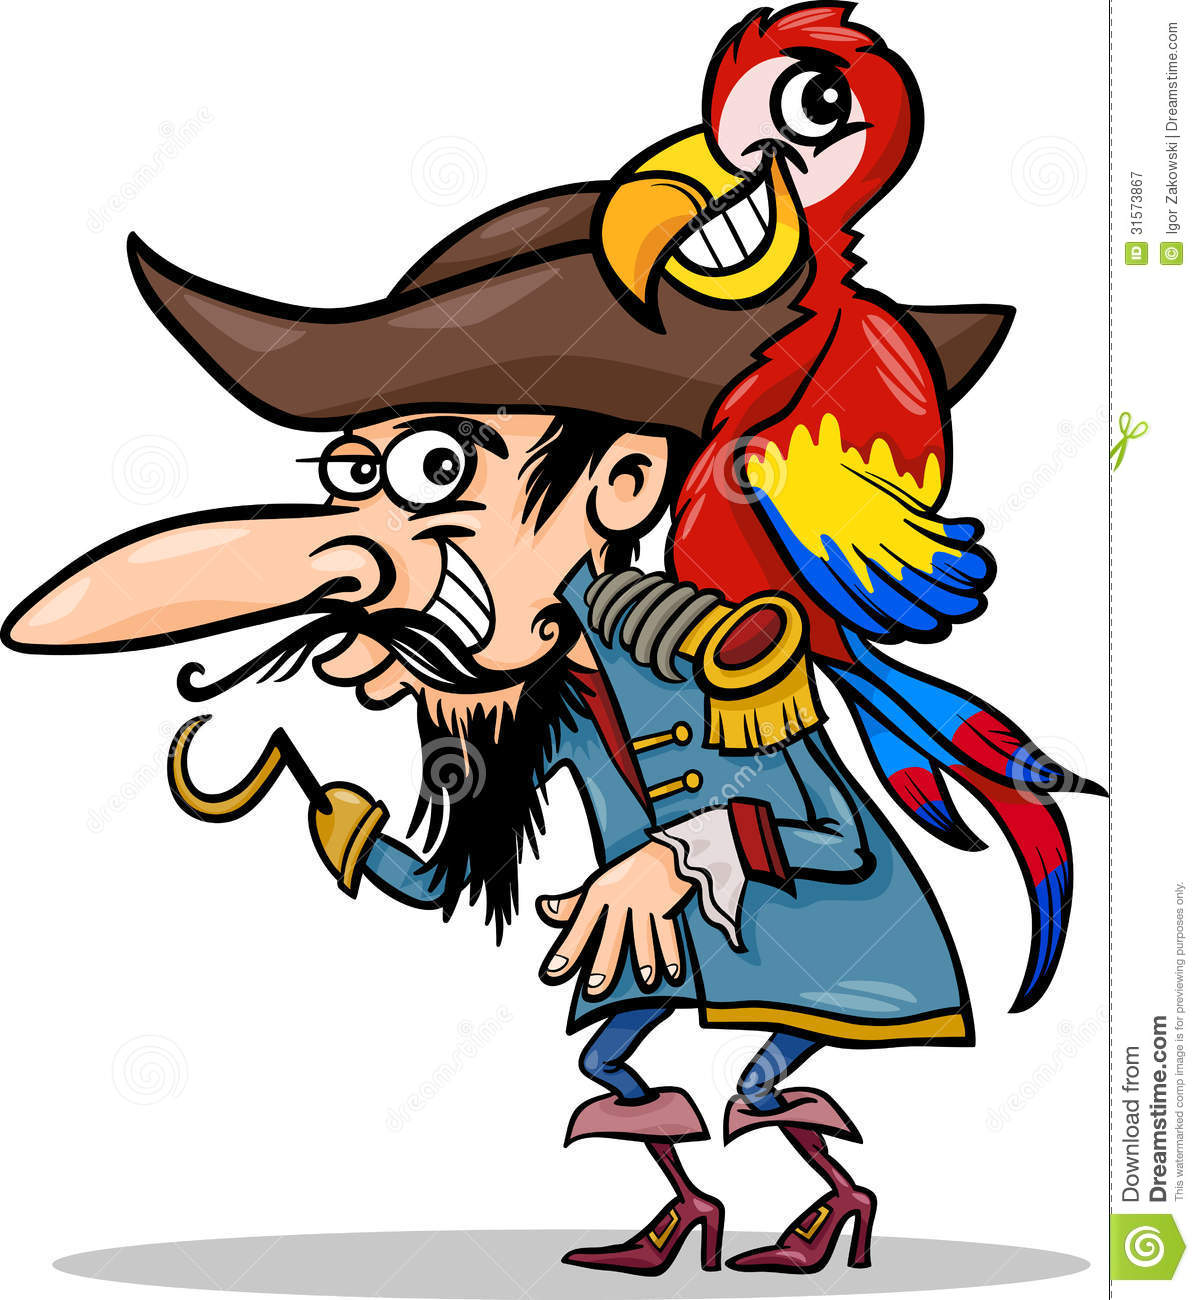 Pirate With Parrot Cartoon Illustration Royalty Free Stock Photography